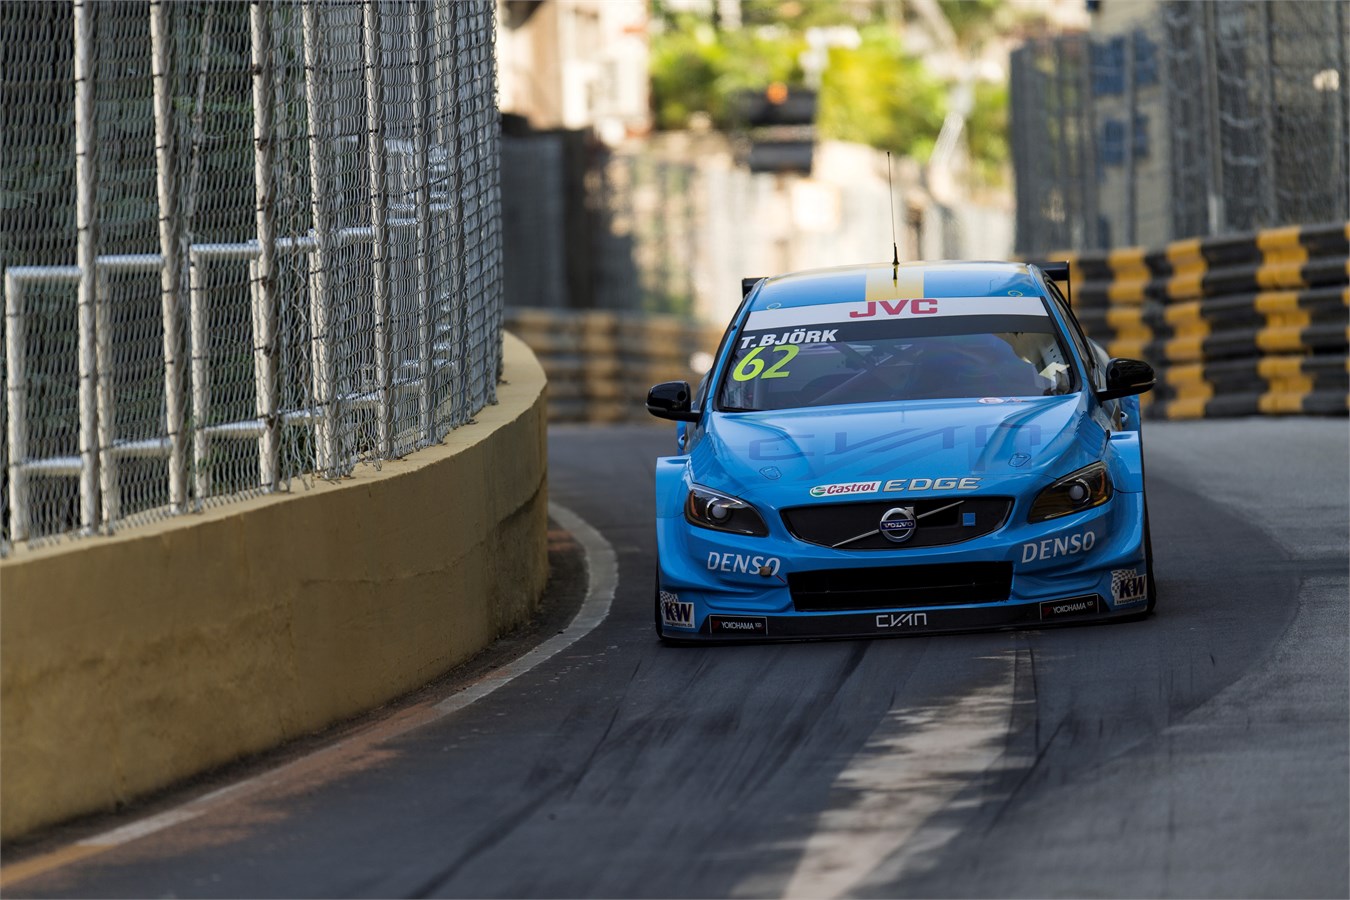 Thed Björk extends World Championship lead after first Macau street race